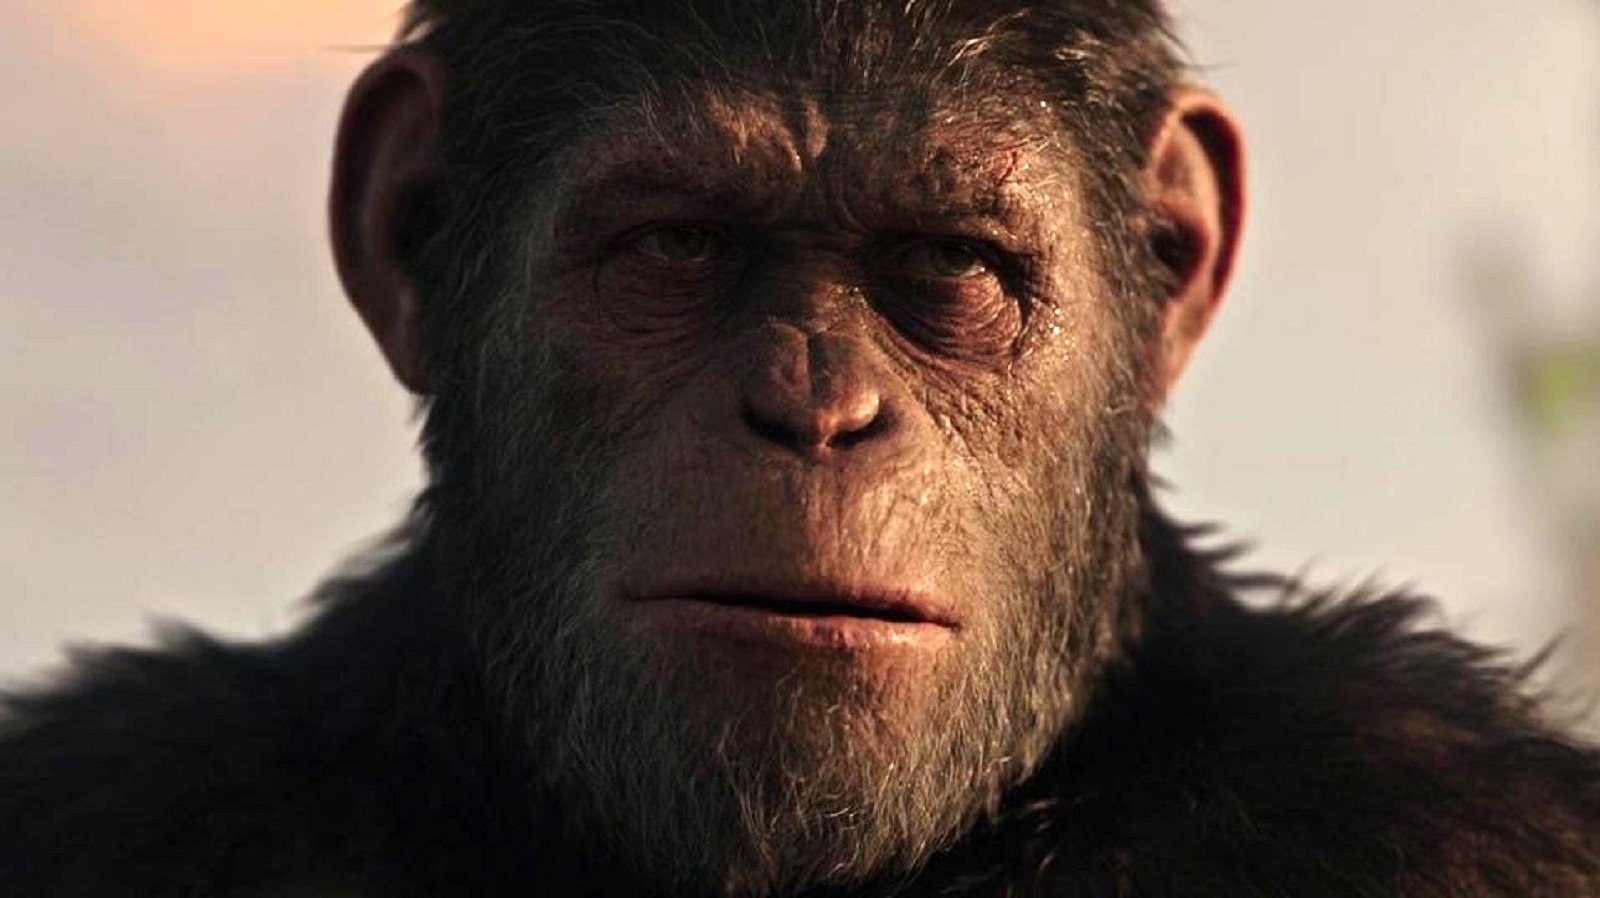 Kingdom Of The Of The Apes Release Date, Cast, Director, Plot And More Details